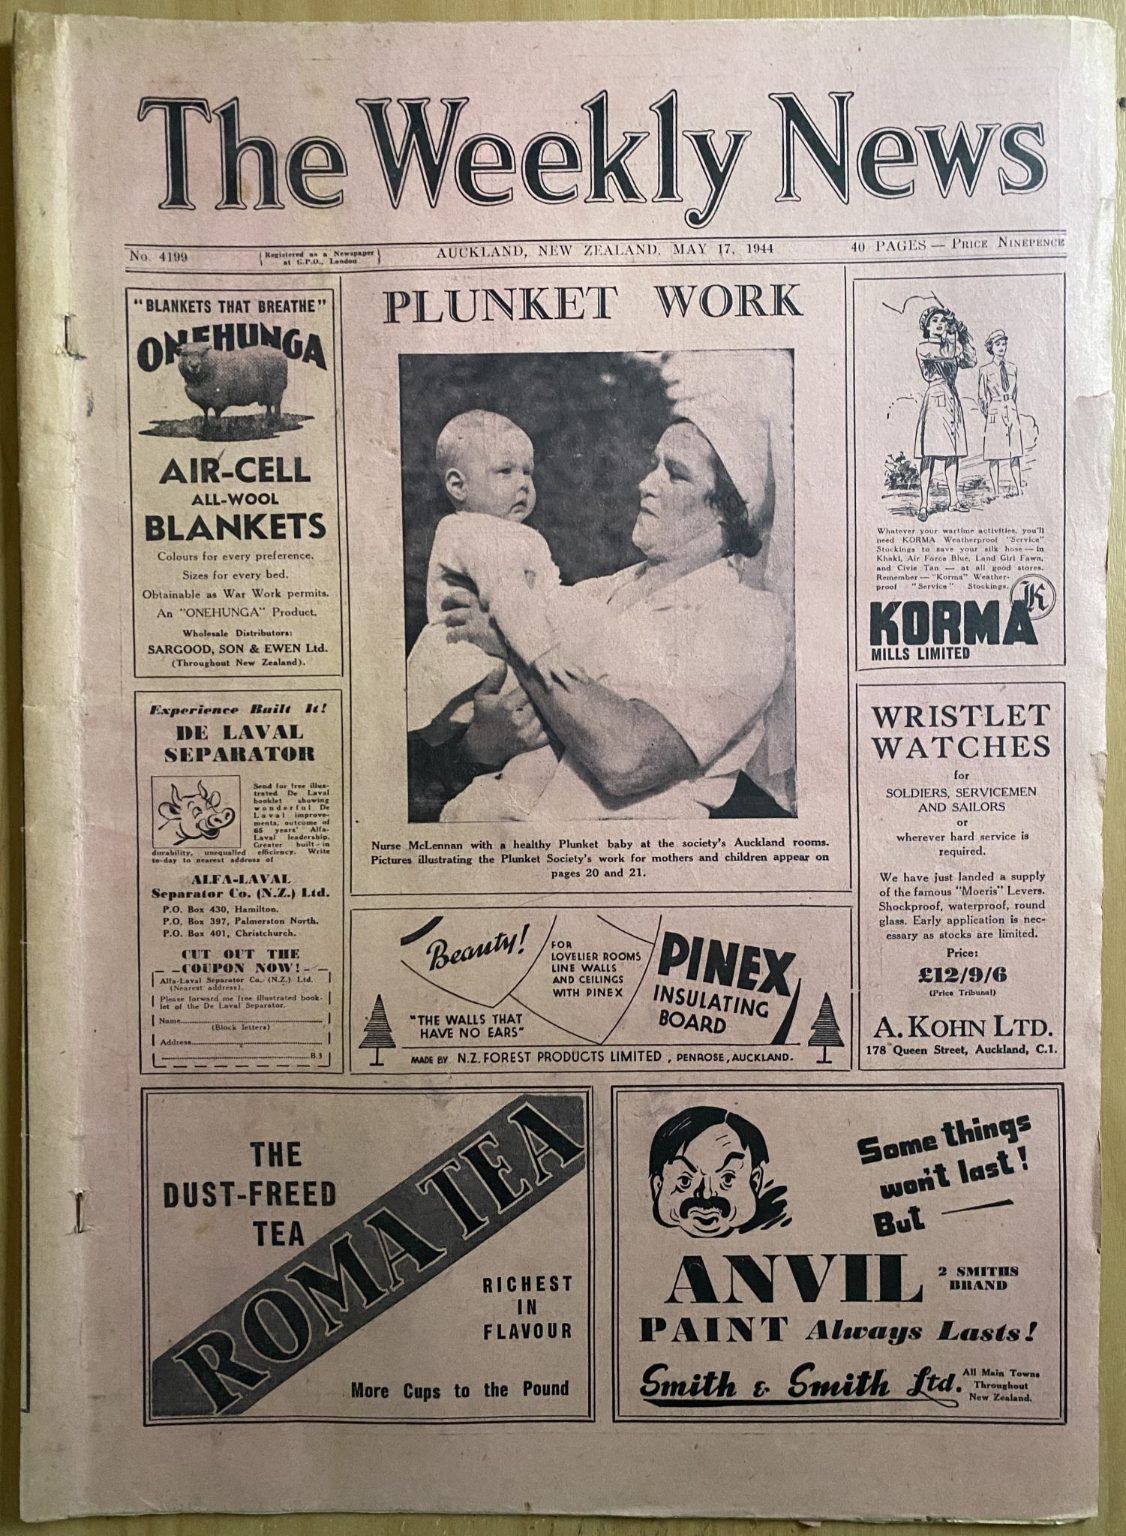 OLD NEWSPAPER: The Weekly News - No. 4199, 17 May 1944